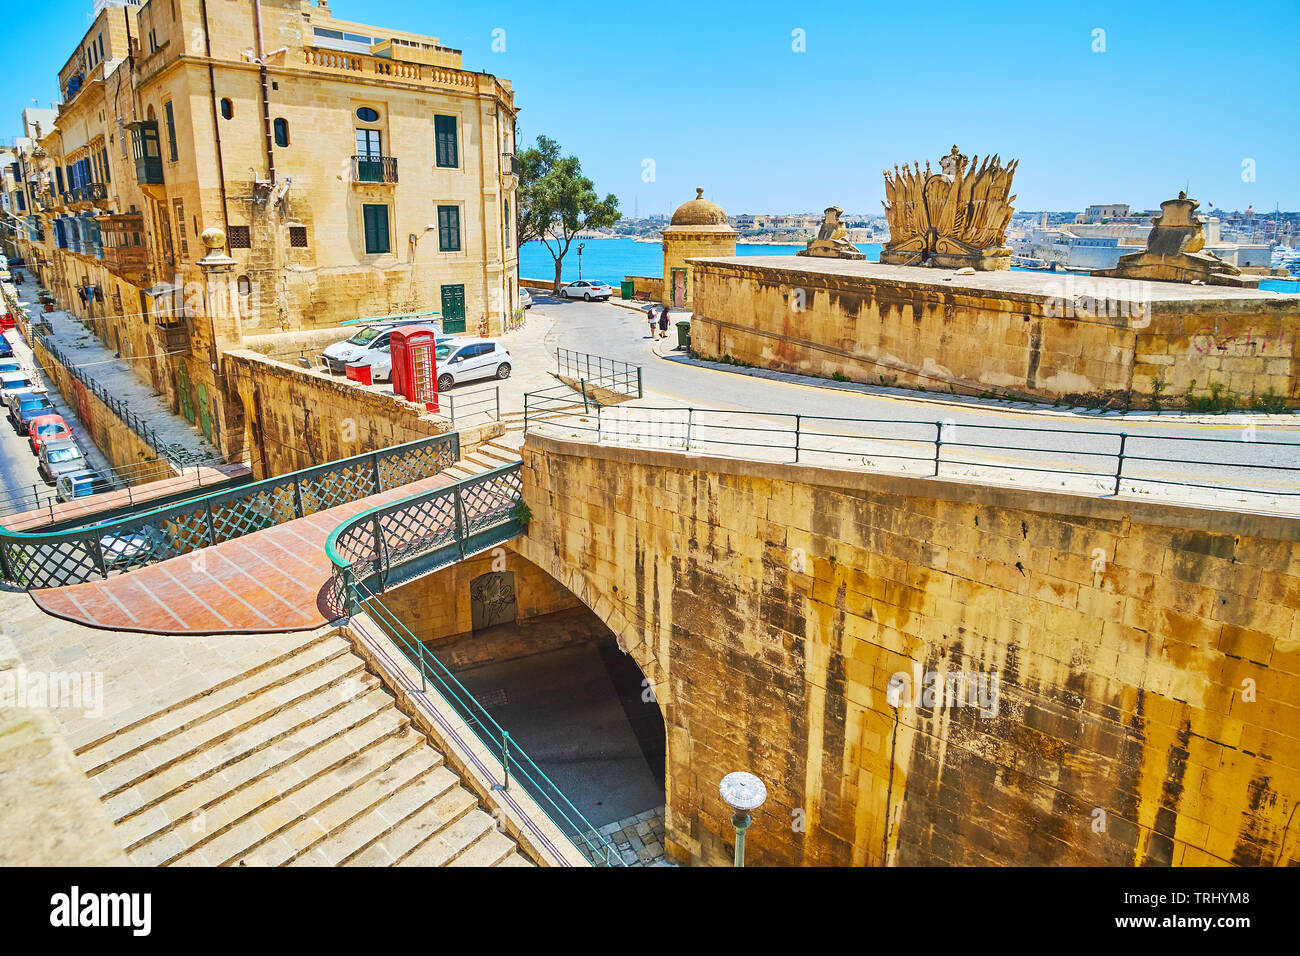 The small pedestrian bridge connects St Ursula street with upper level of Victoria gate - the part of the medieval Valletta fortiications, Malta. Stock Photo